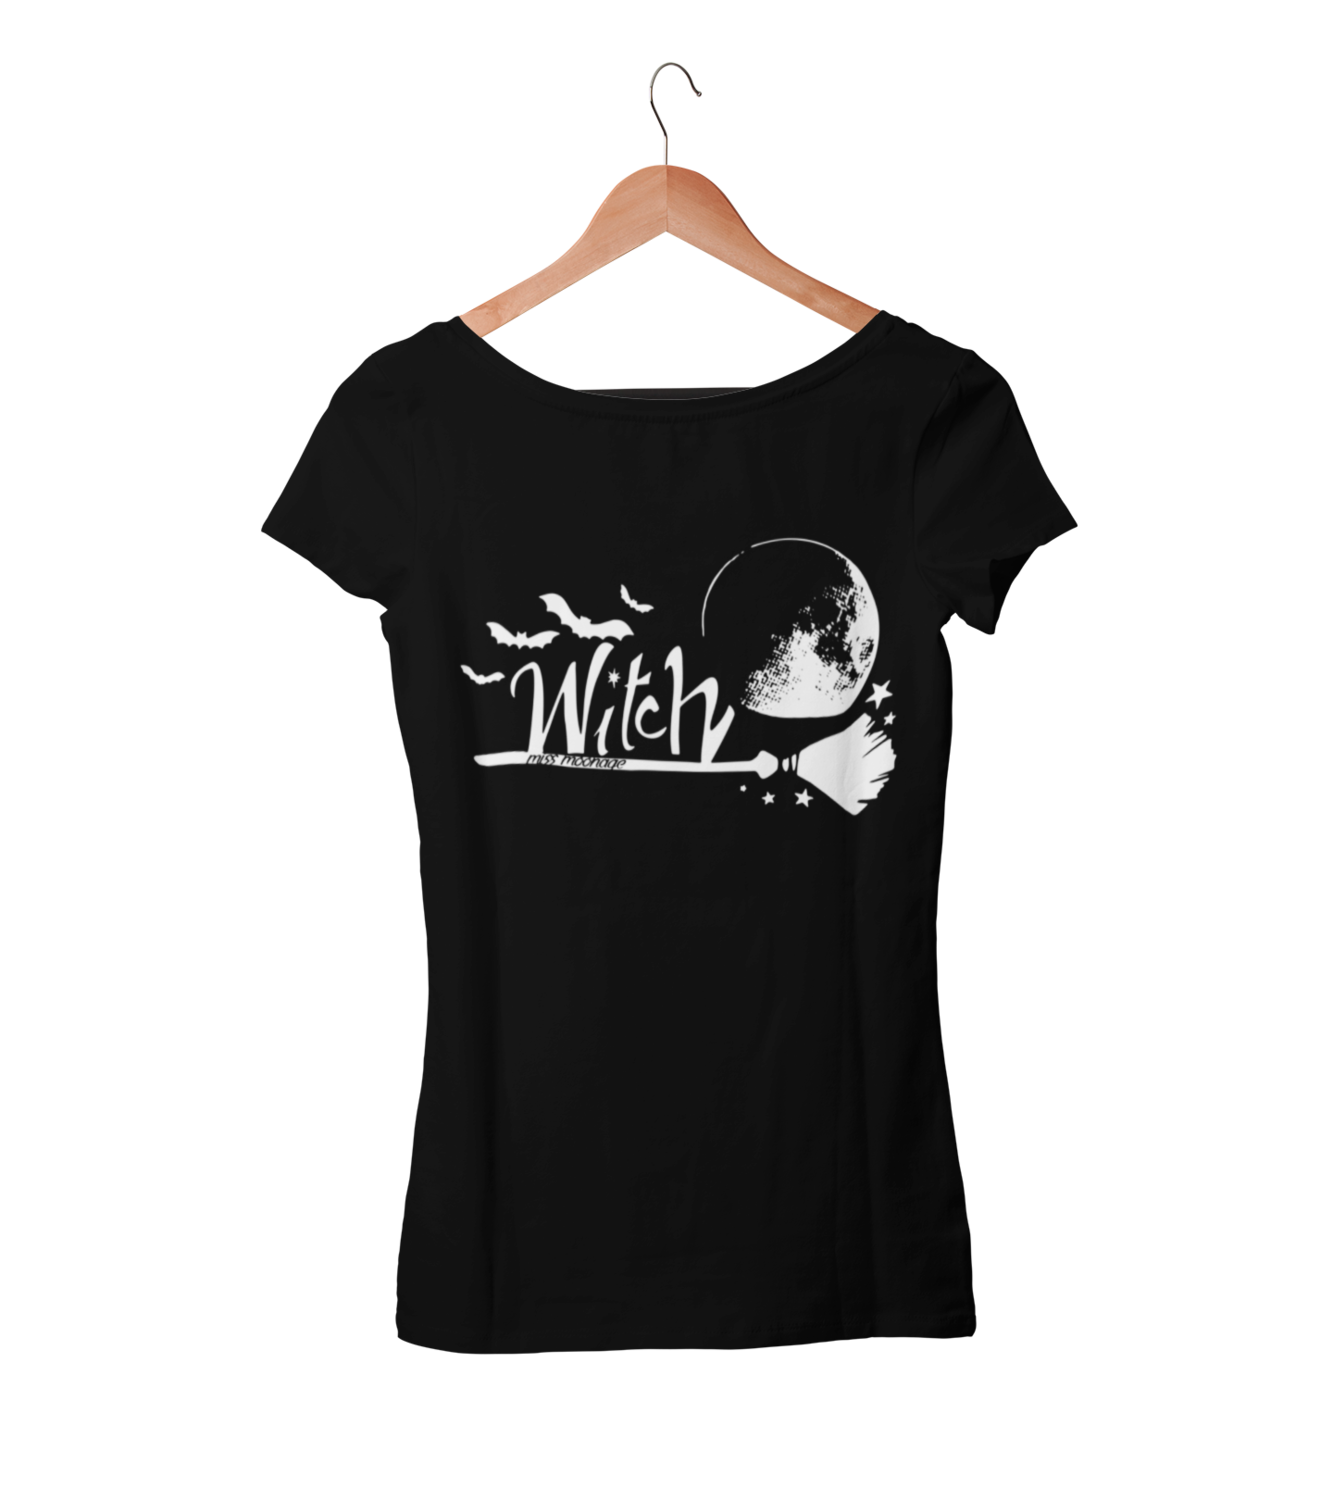 WITCH by MISS MOONAGE tshirt for WOMEN